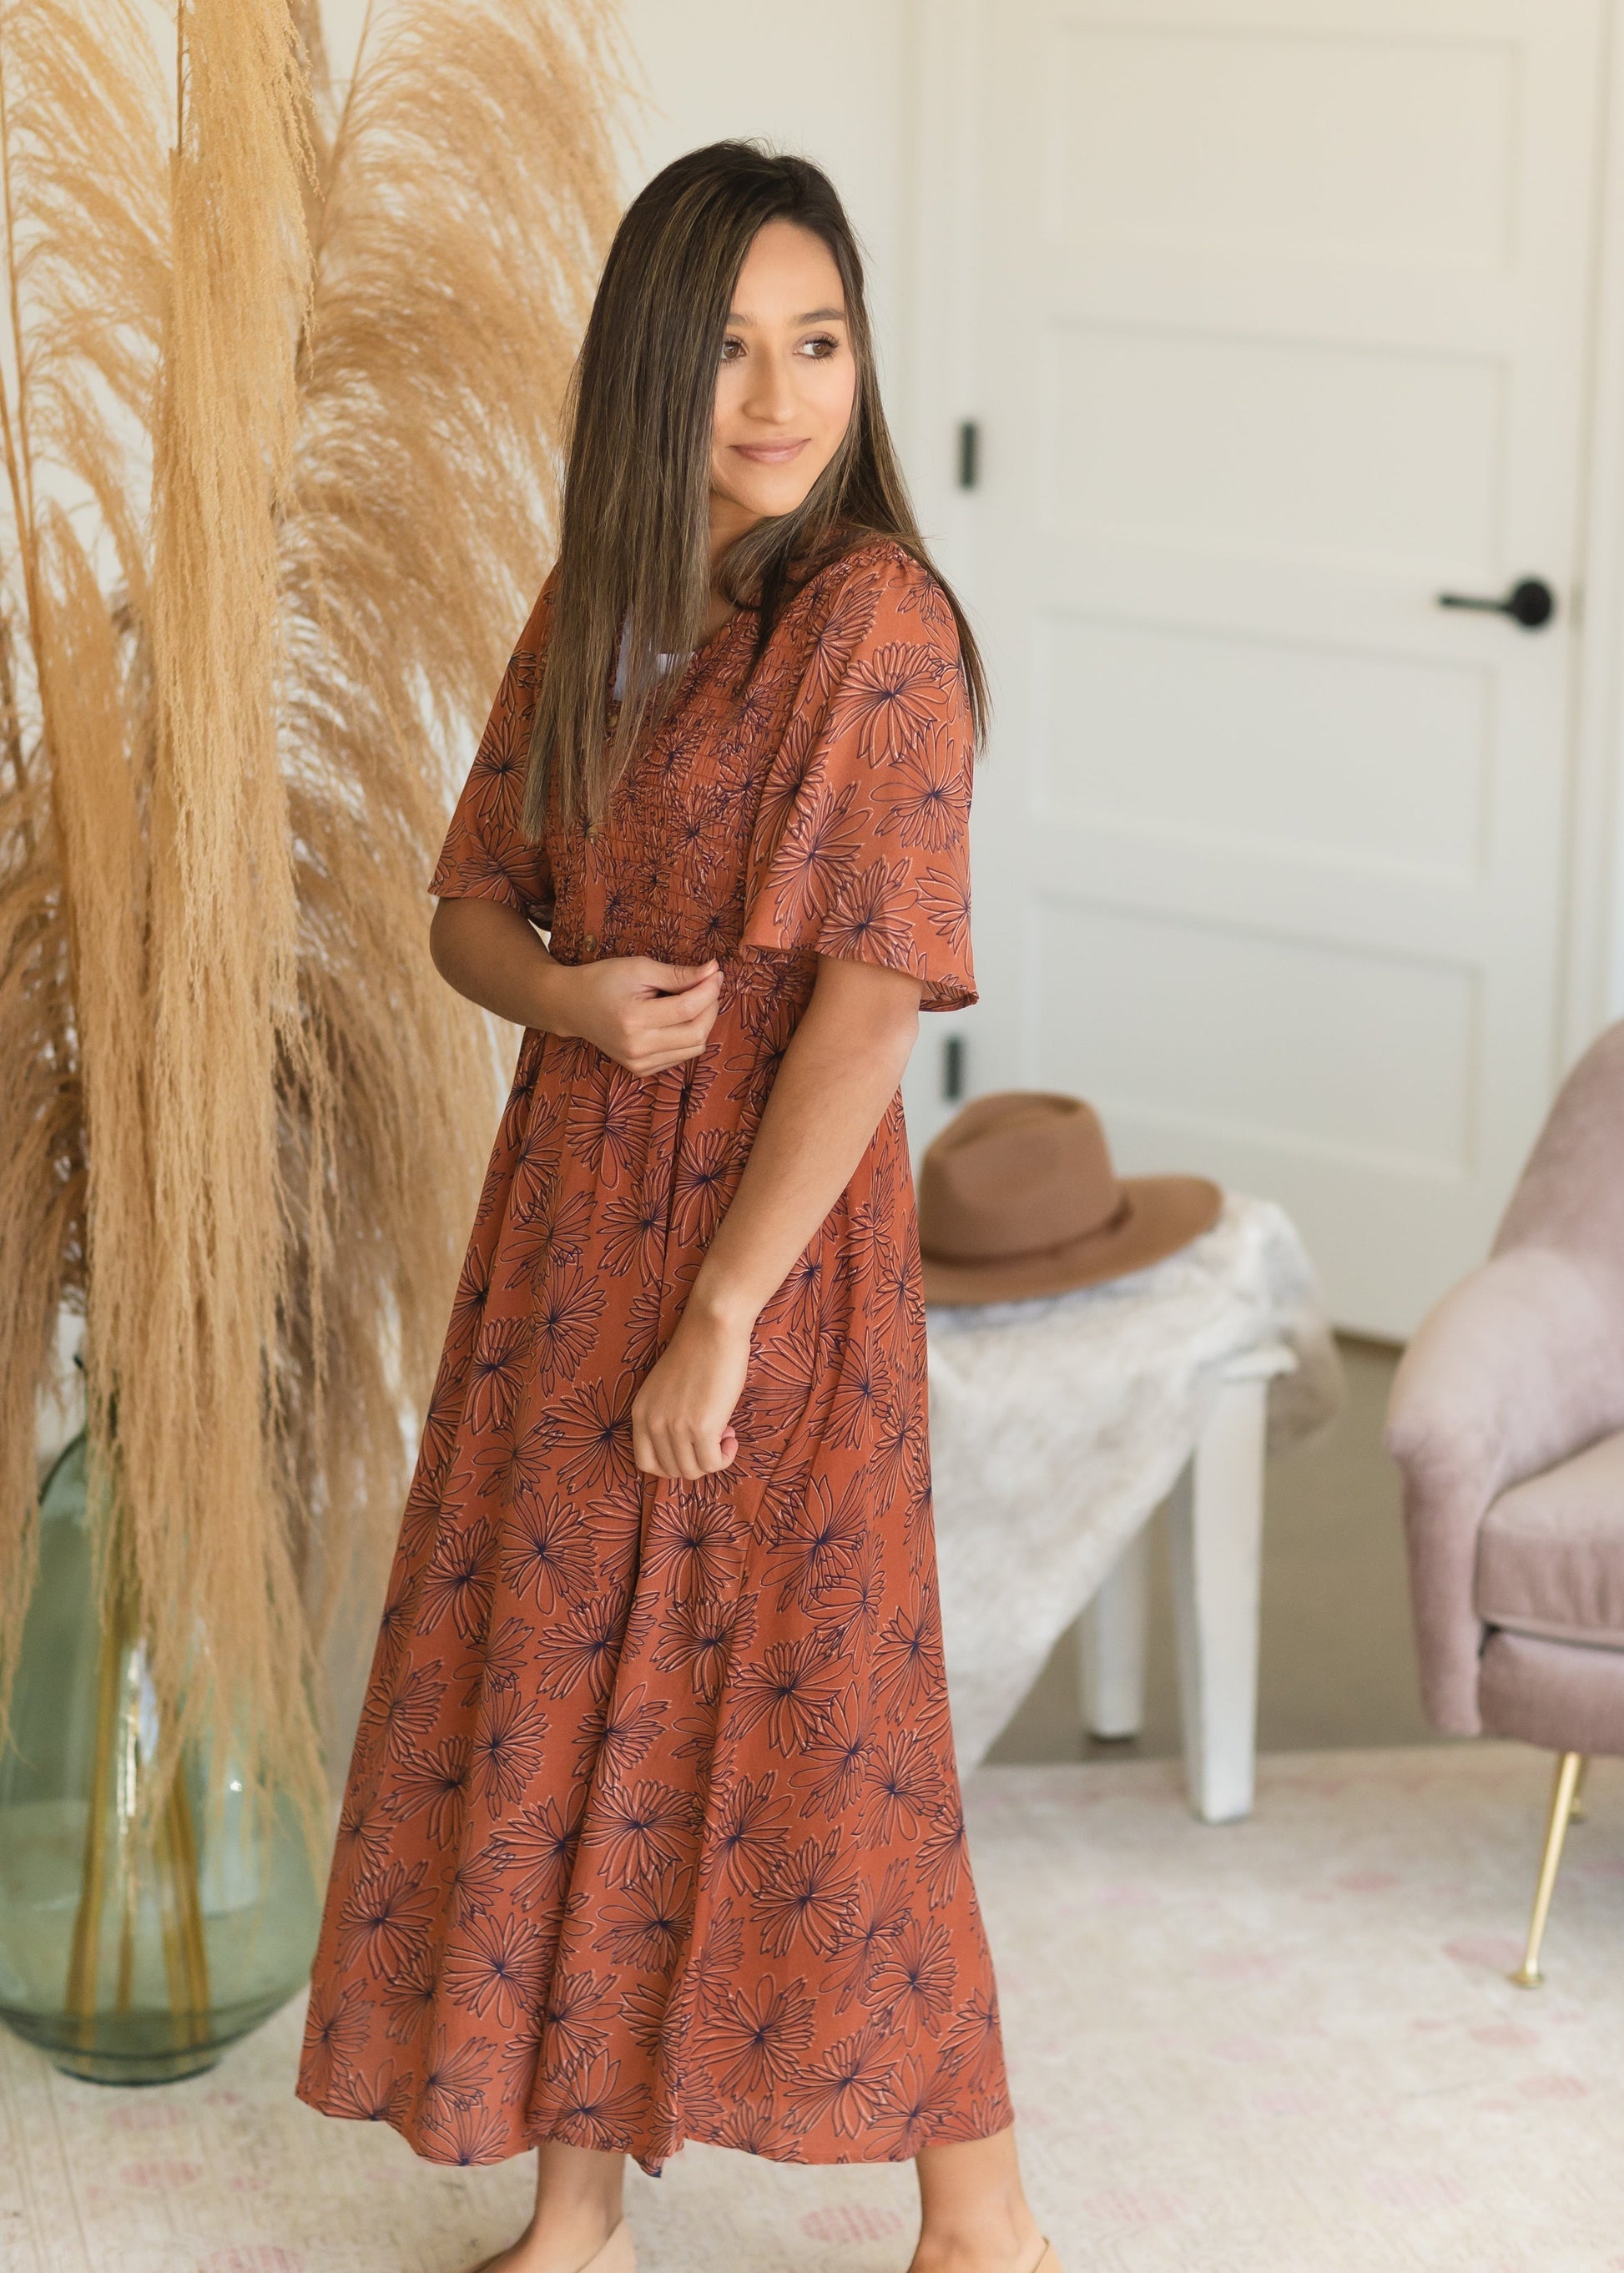 Rust Smocked Button Front Maxi Dress - FINAL SALE Dresses